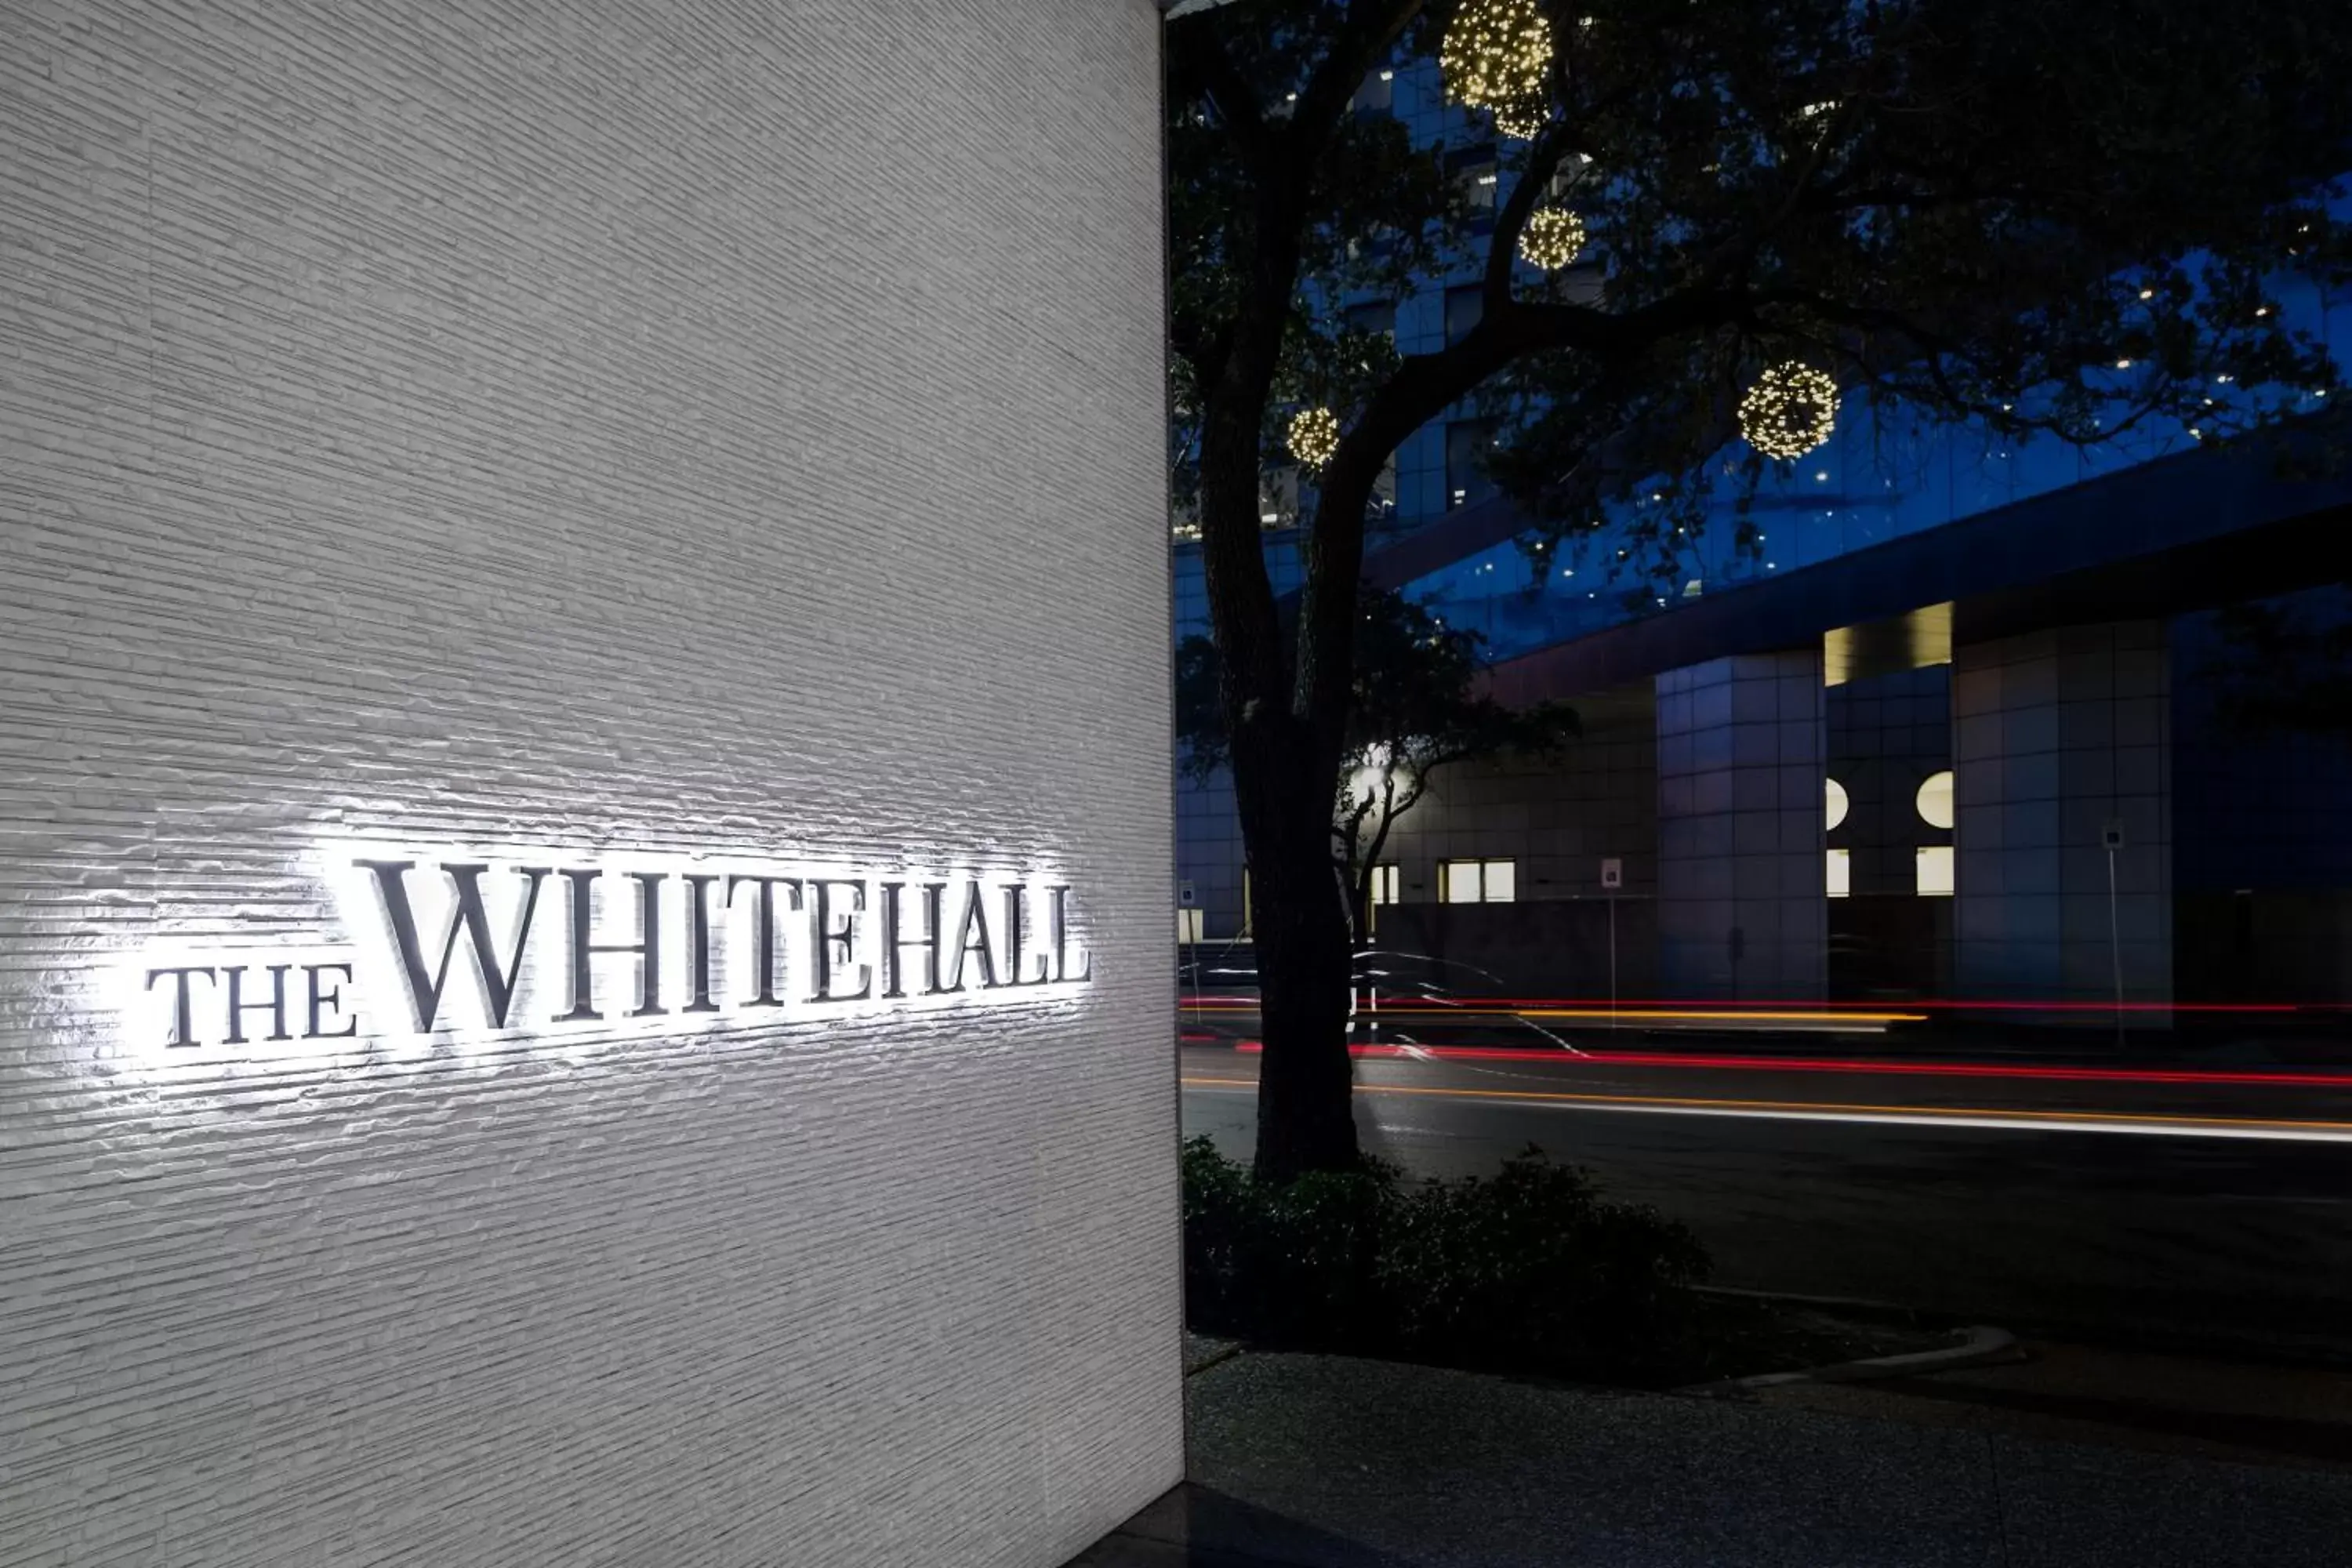 Property logo or sign, Property Logo/Sign in The Whitehall Houston